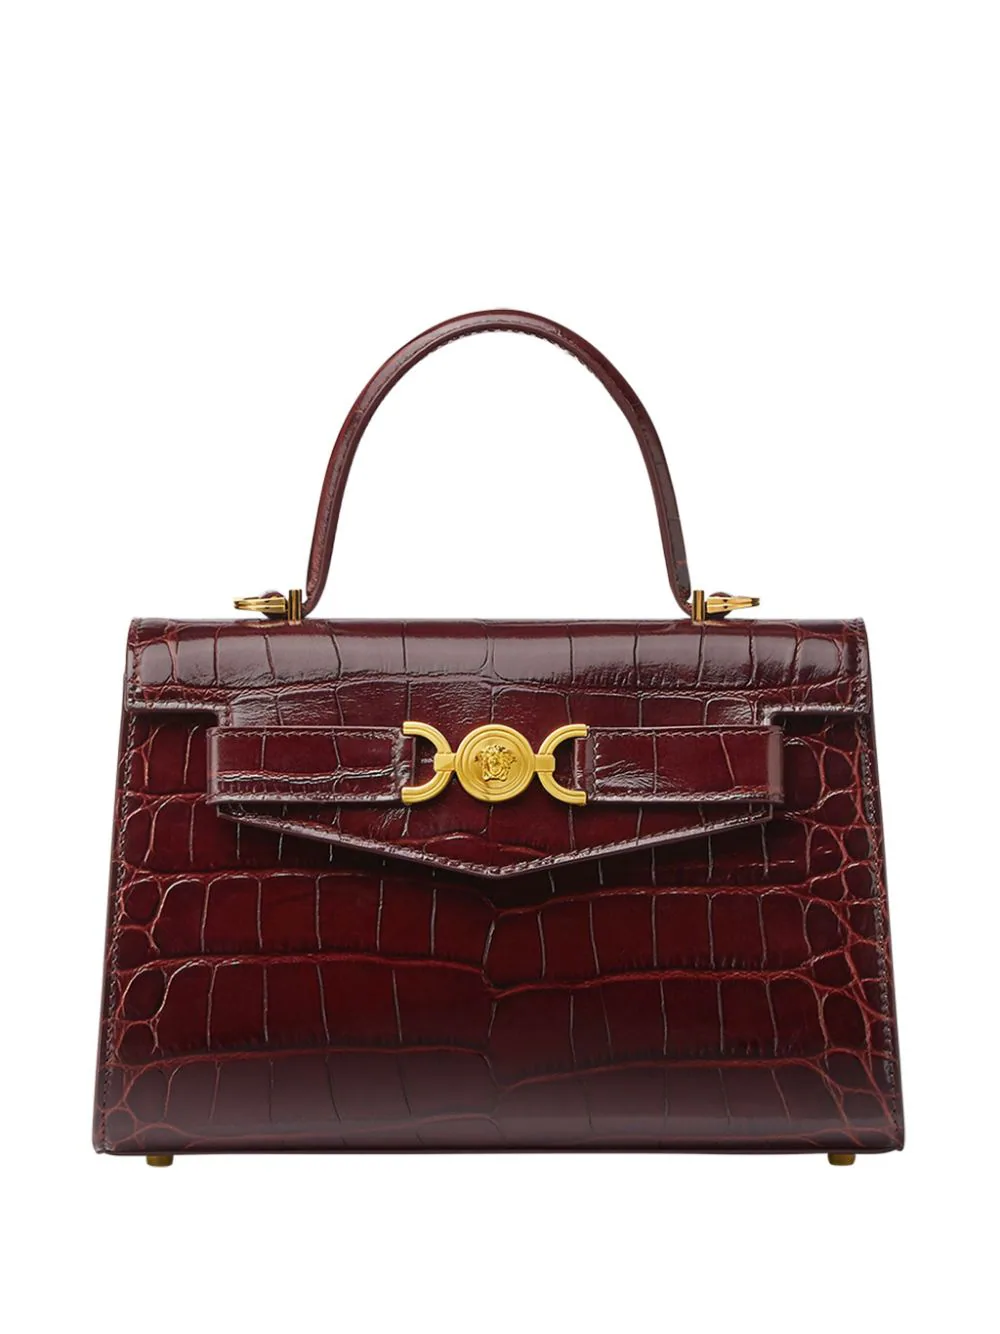 Versace crocodile-embossed leather tote bag Discounts and Cashback